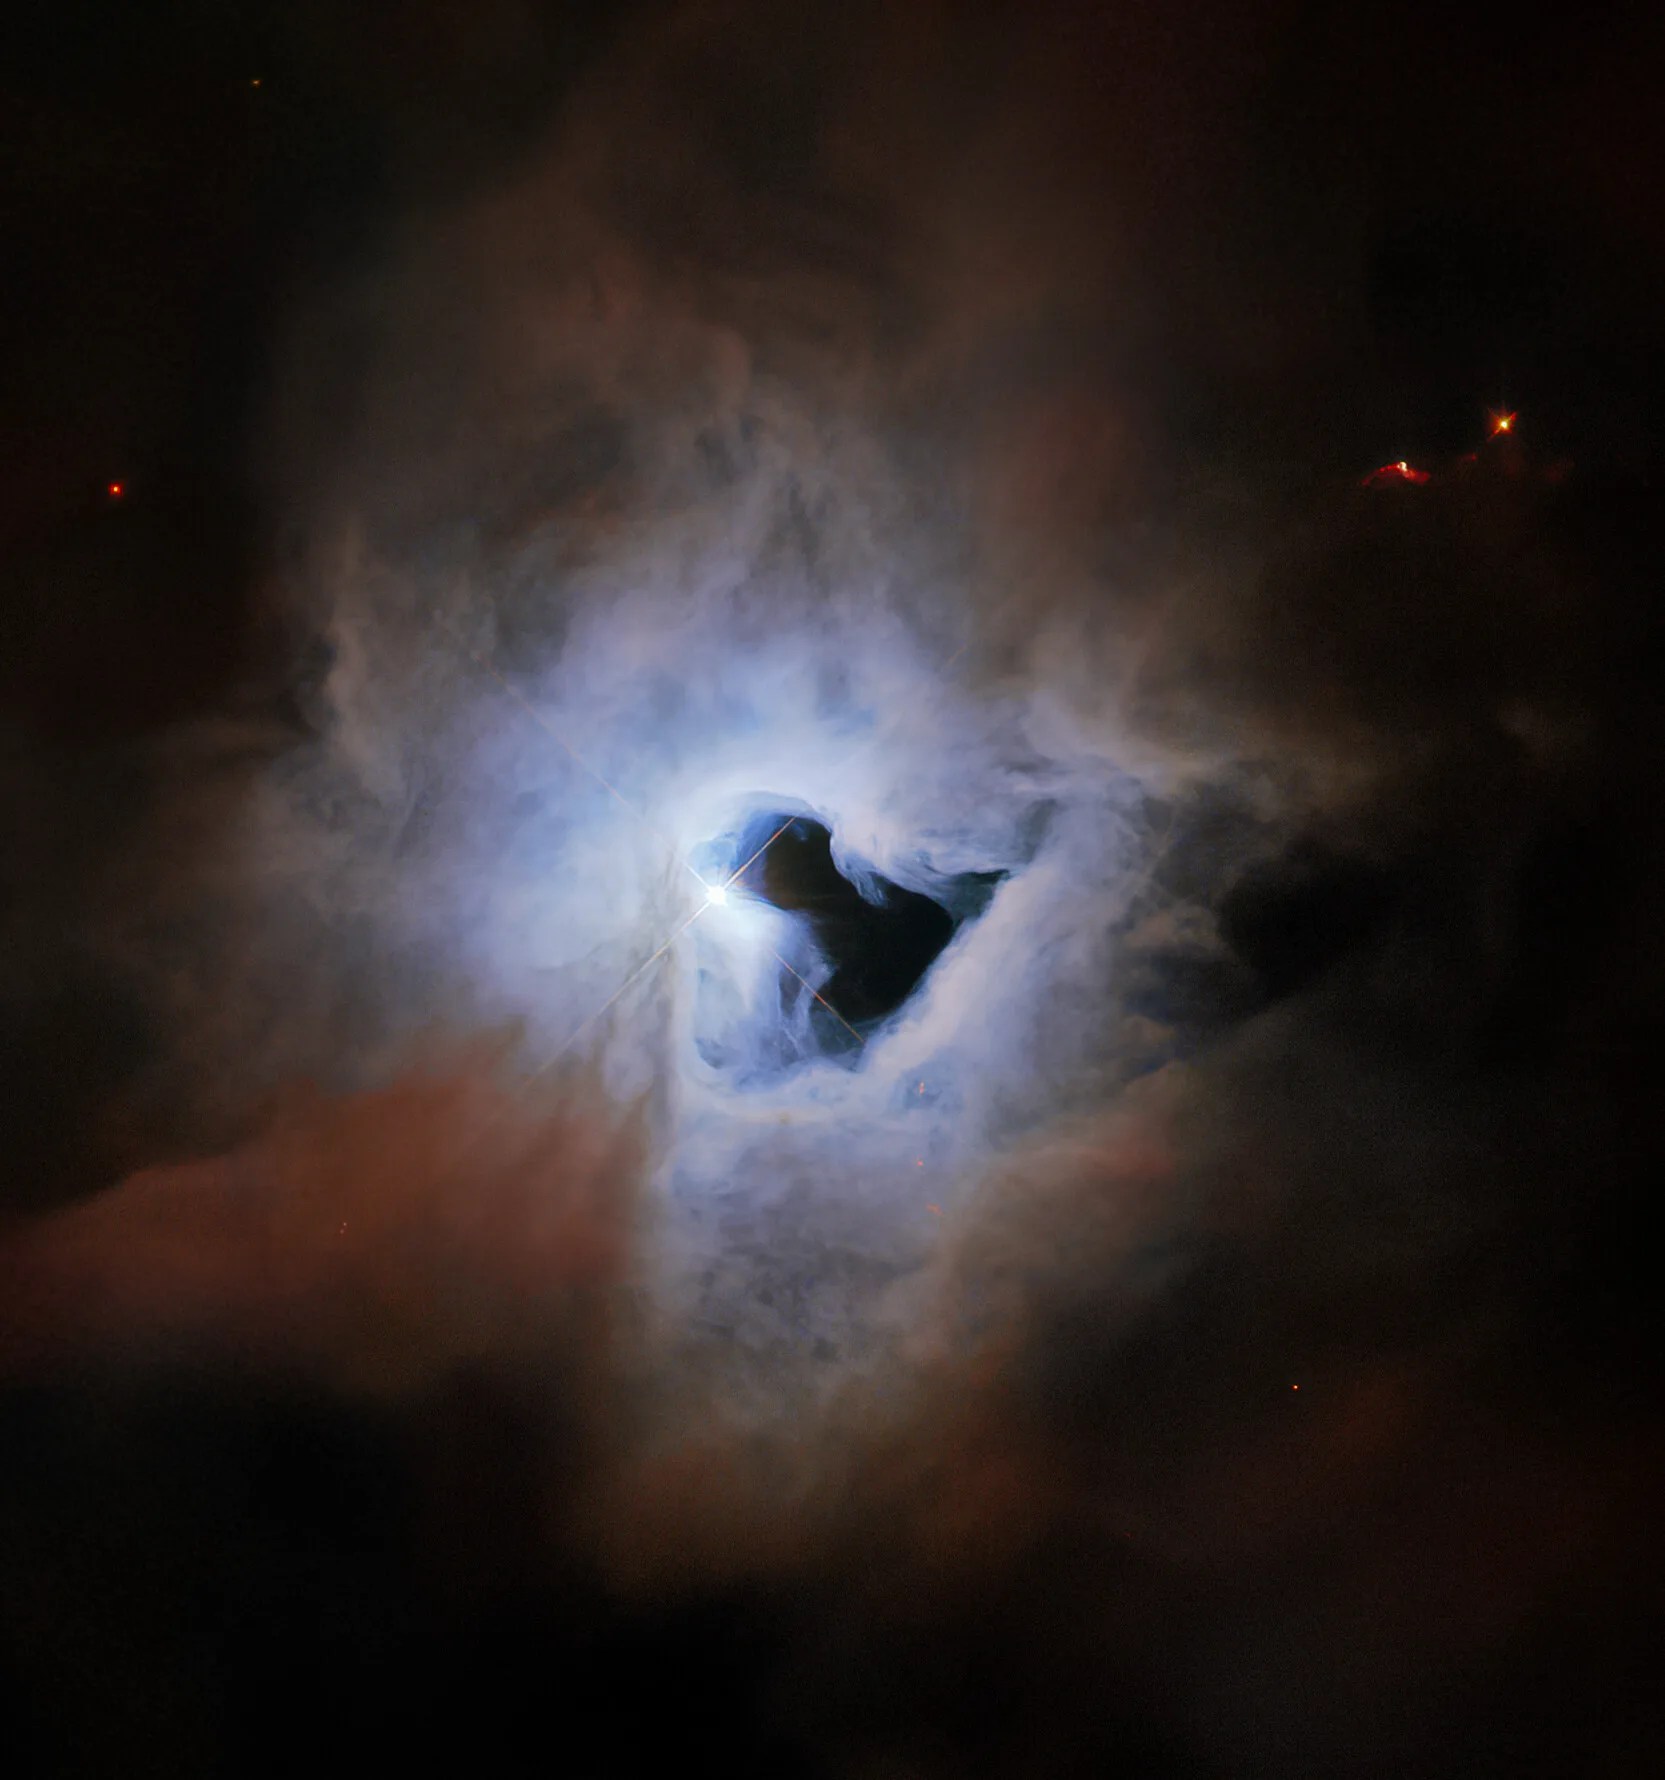 Bright blue-white cloud with a black keyhole-shaped void in the middle. edge of the blue-white cloud transitions to brownish-rusty colored cloud.